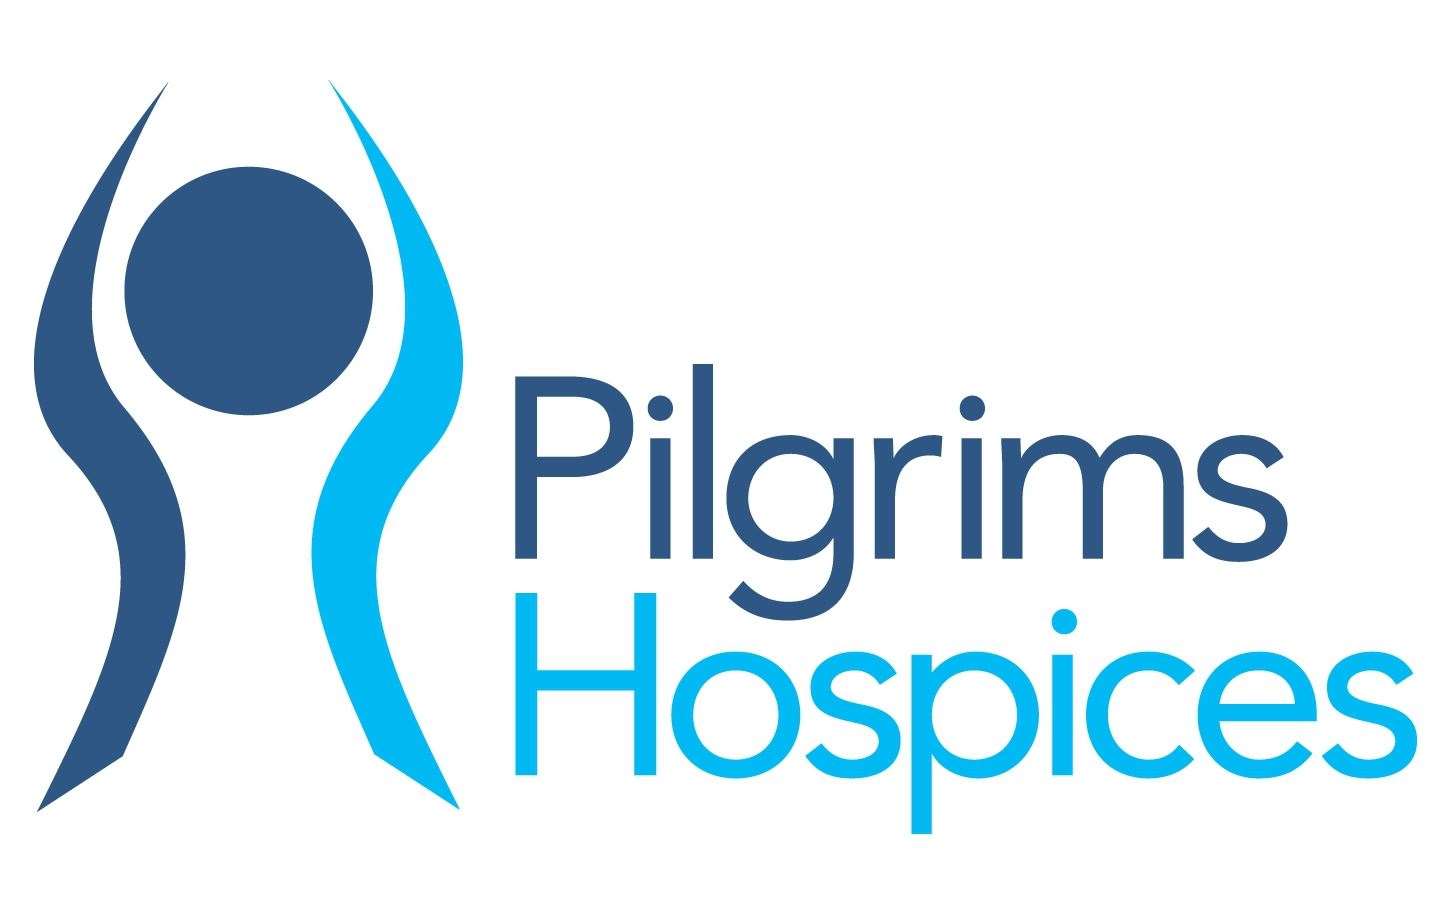 Pilgrim's Hospice will vacate the space in Chartham on January 13